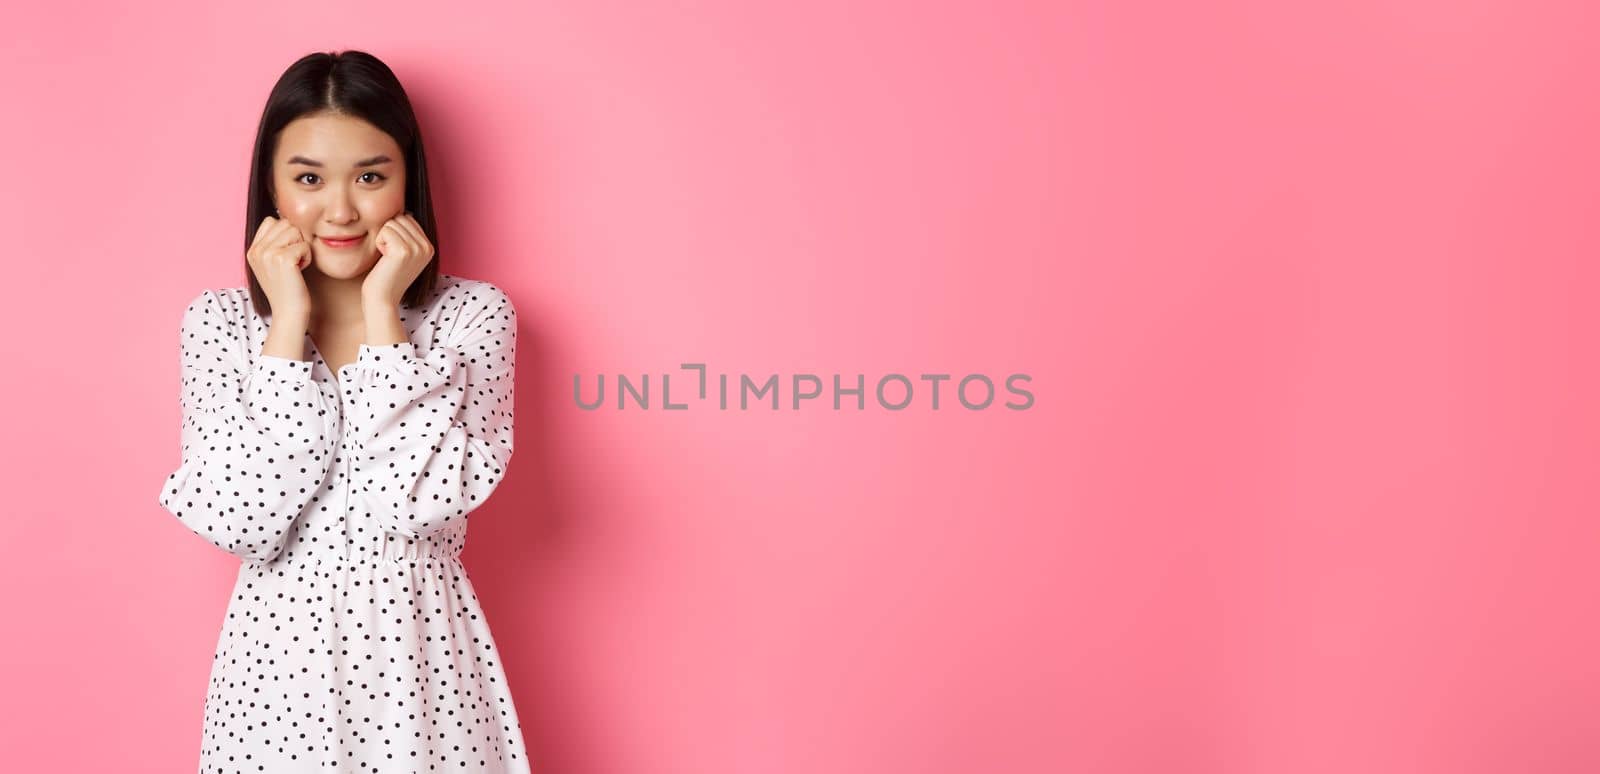 Cute and shy asian girl blushing, touching cheeks and looking at camera silly, standing against pink background.